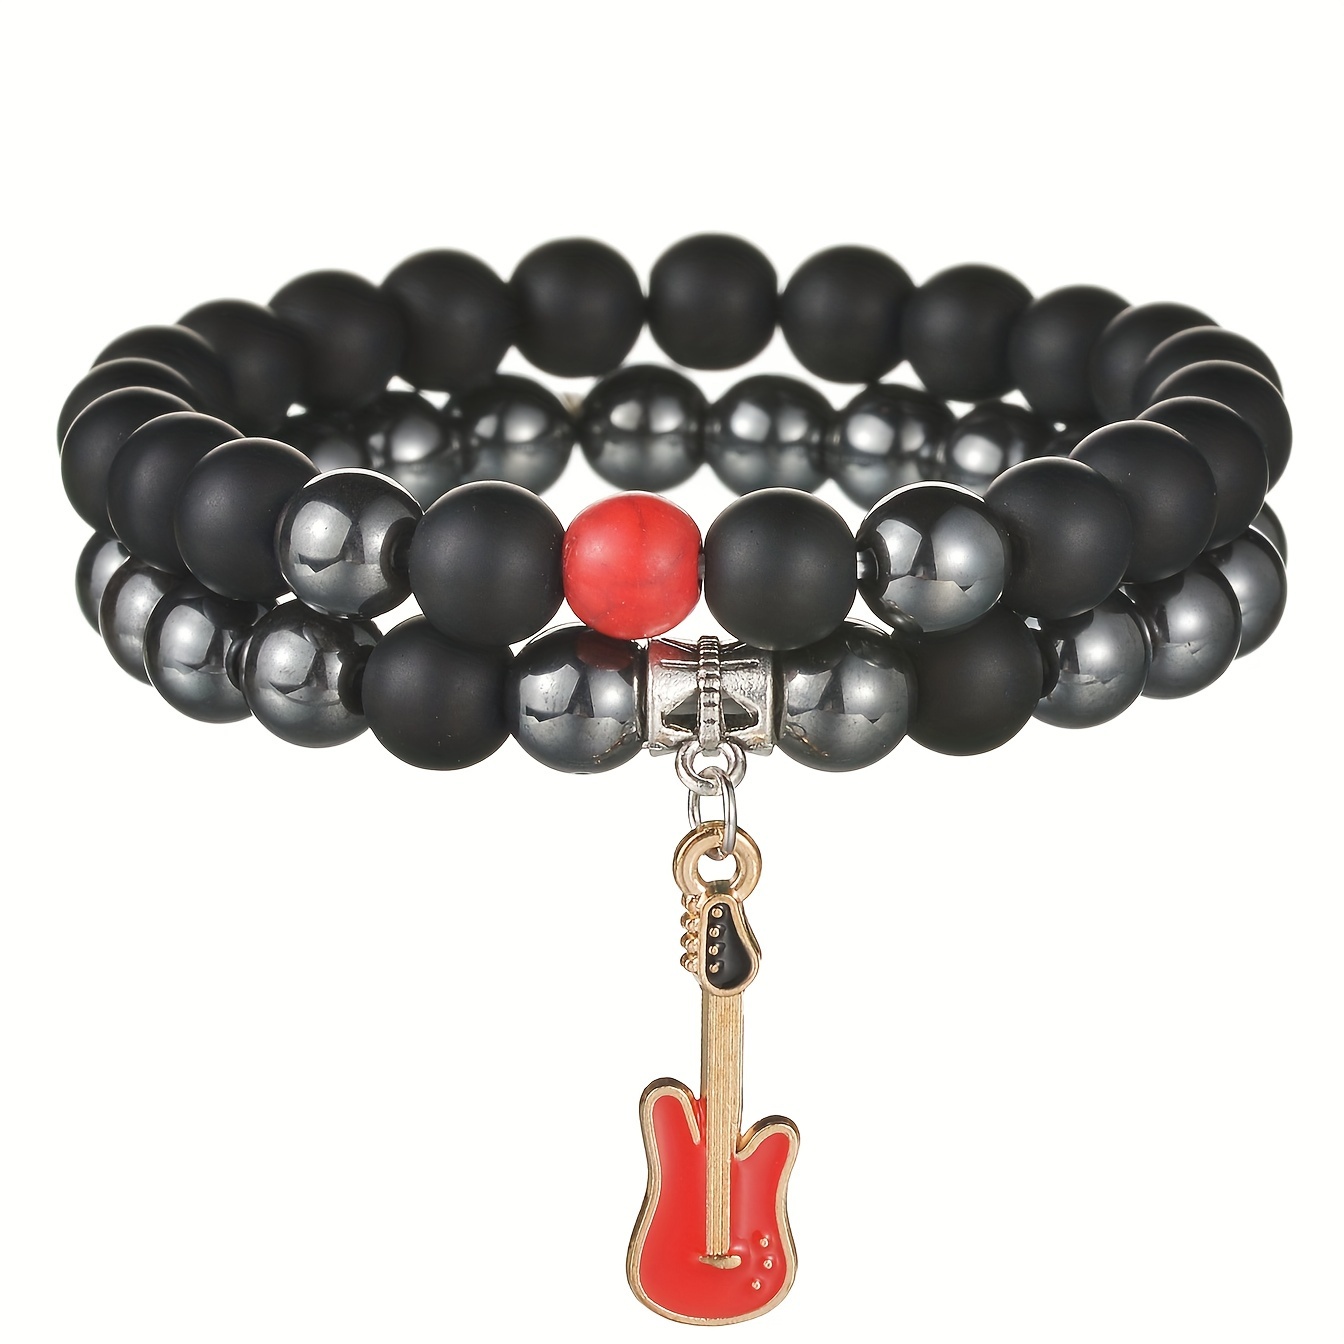 A set of bracelets with beads - black, marble